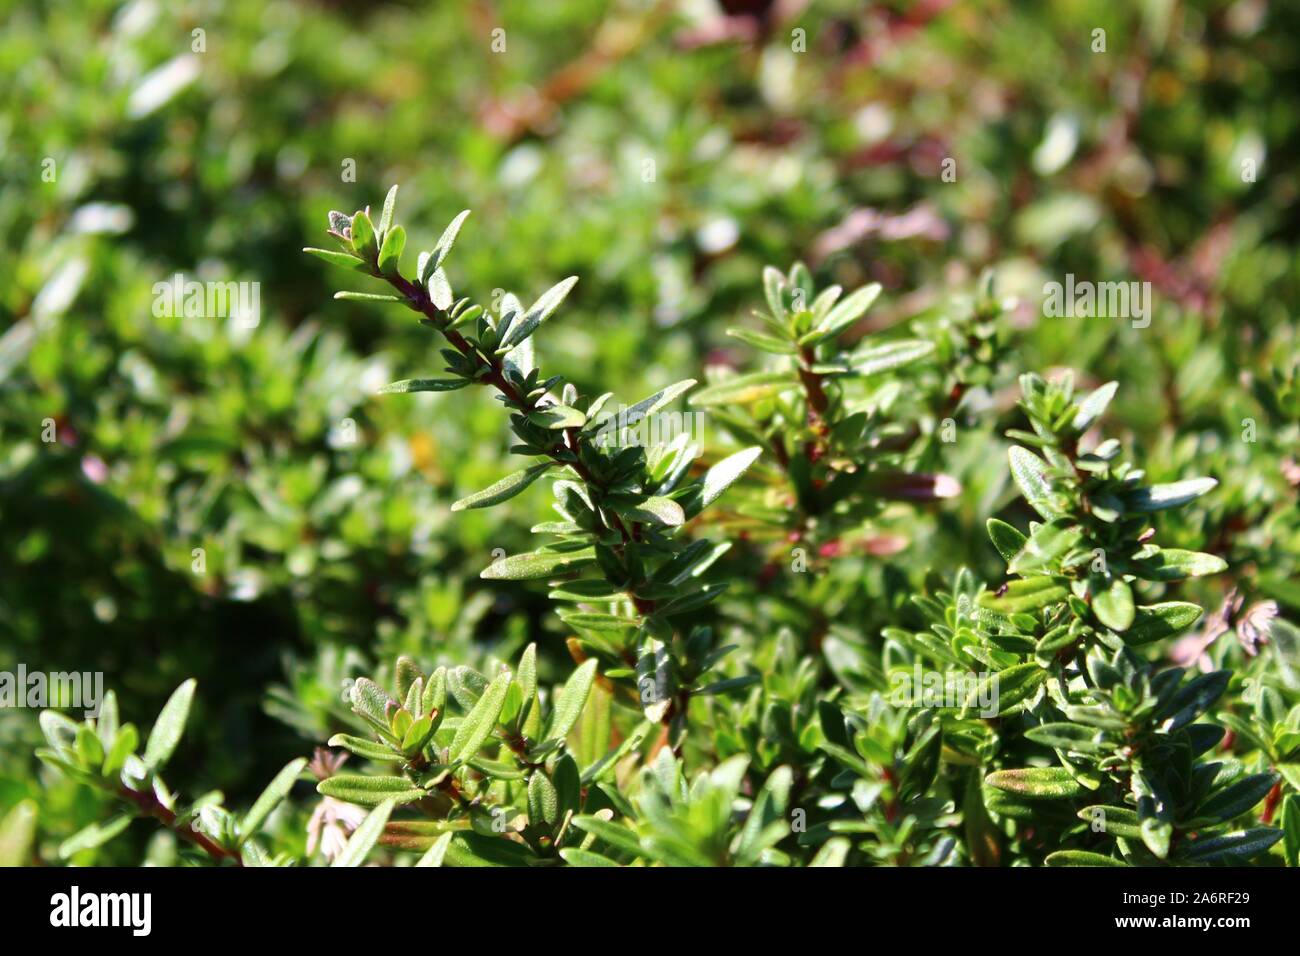 The Picture Shows Thyme In The Garden Stock Photo 331201649 Alamy